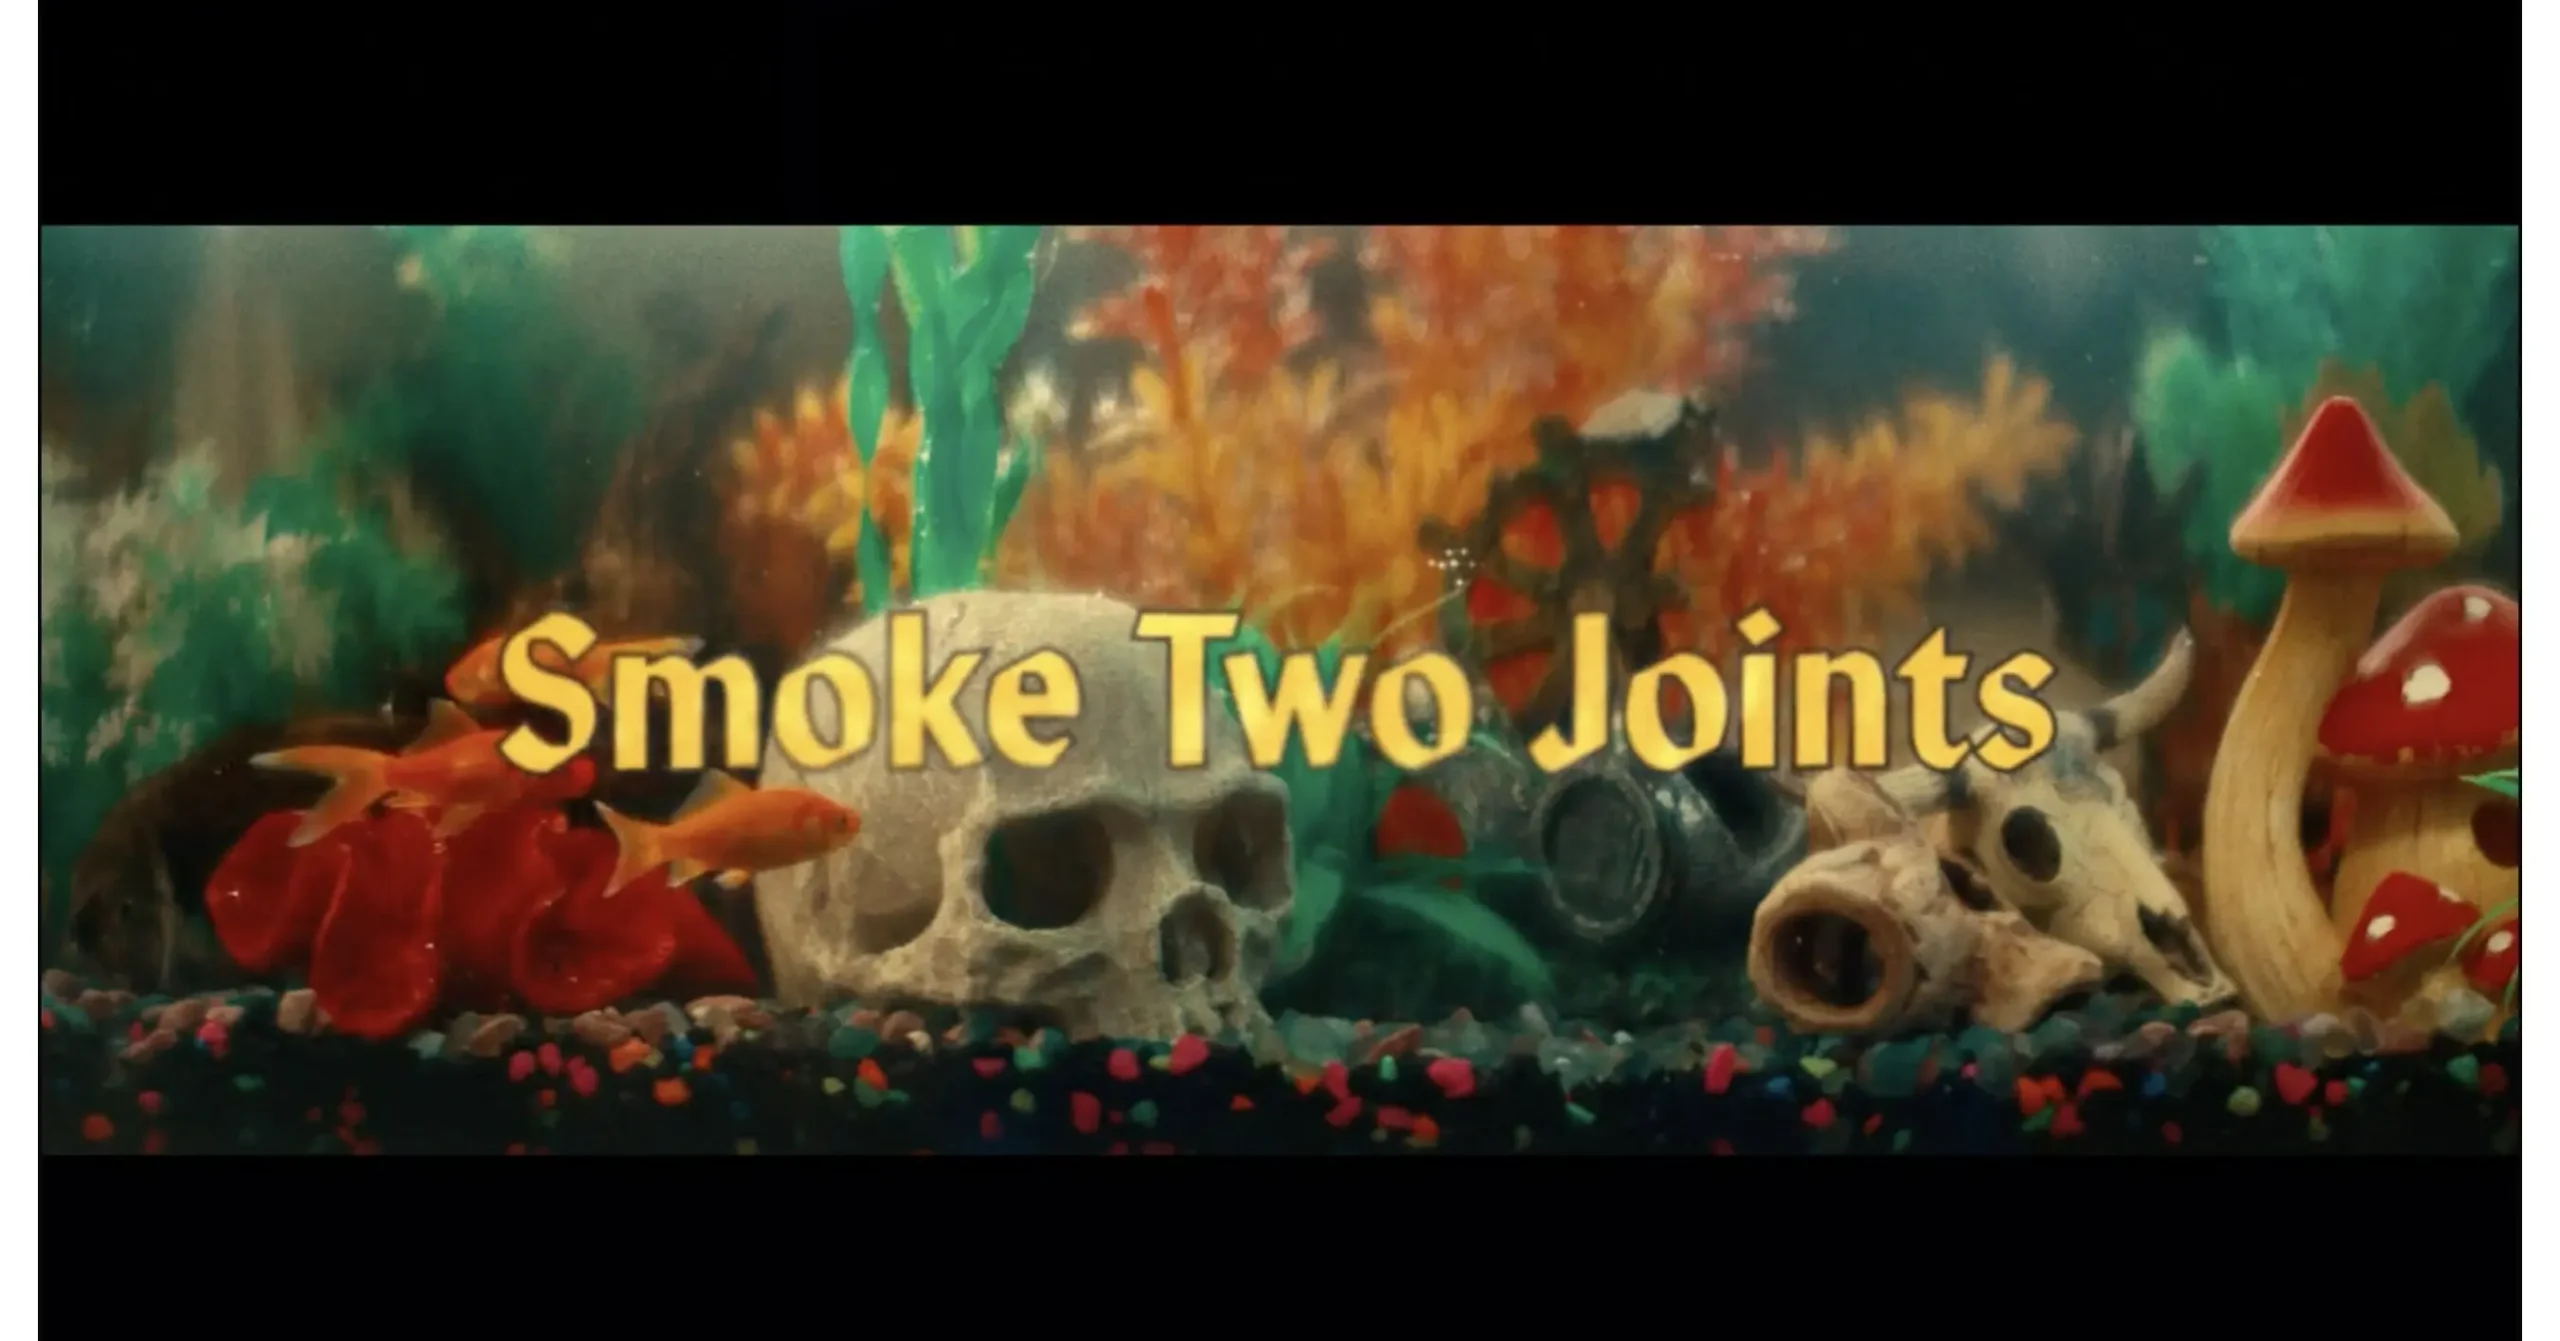 i smoked two joints - Who are the actors in the Smoke Two Joints video